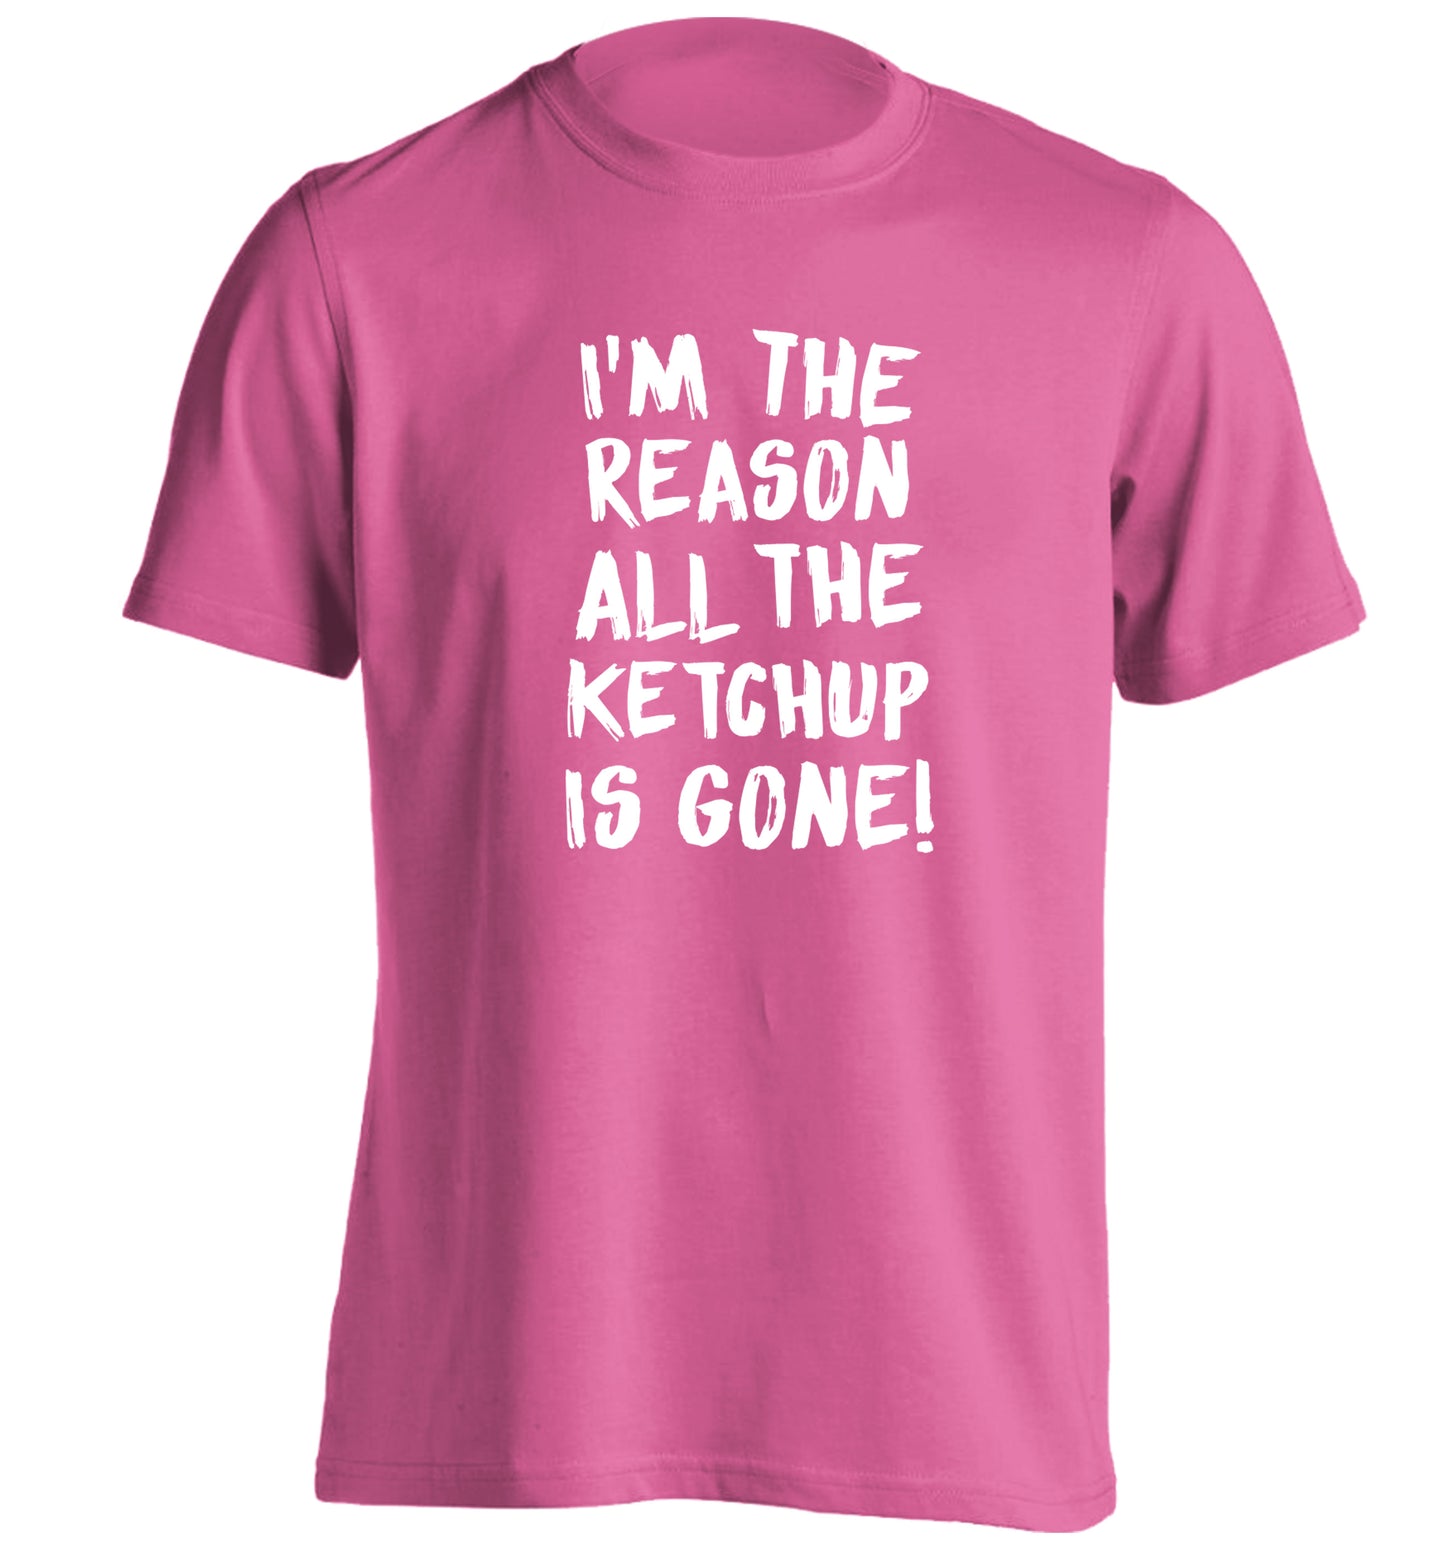 I'm the reason why all the ketchup is gone adults unisex pink Tshirt 2XL